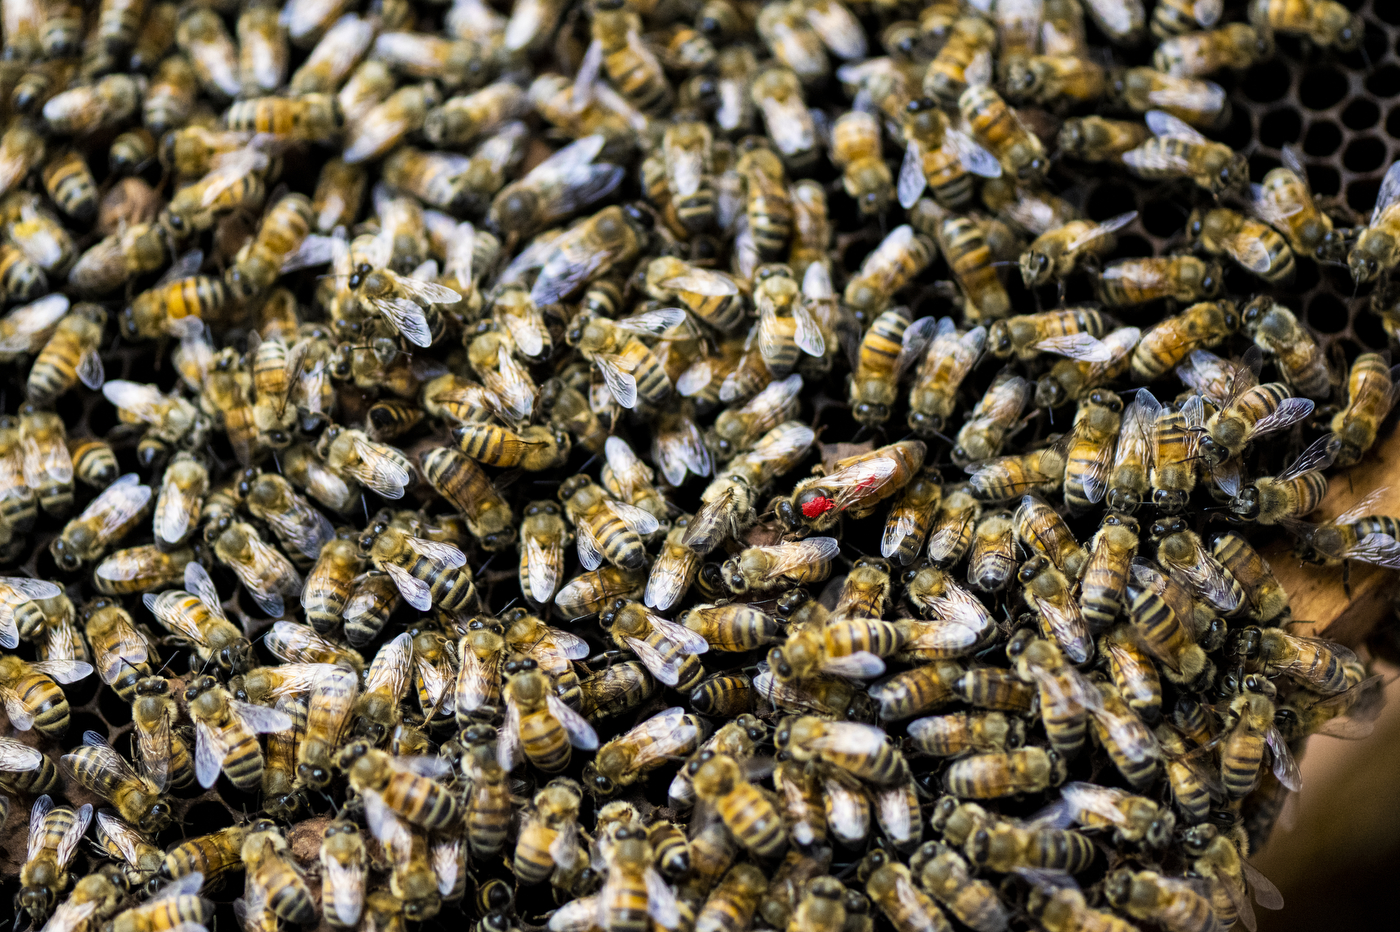 A group of bees.